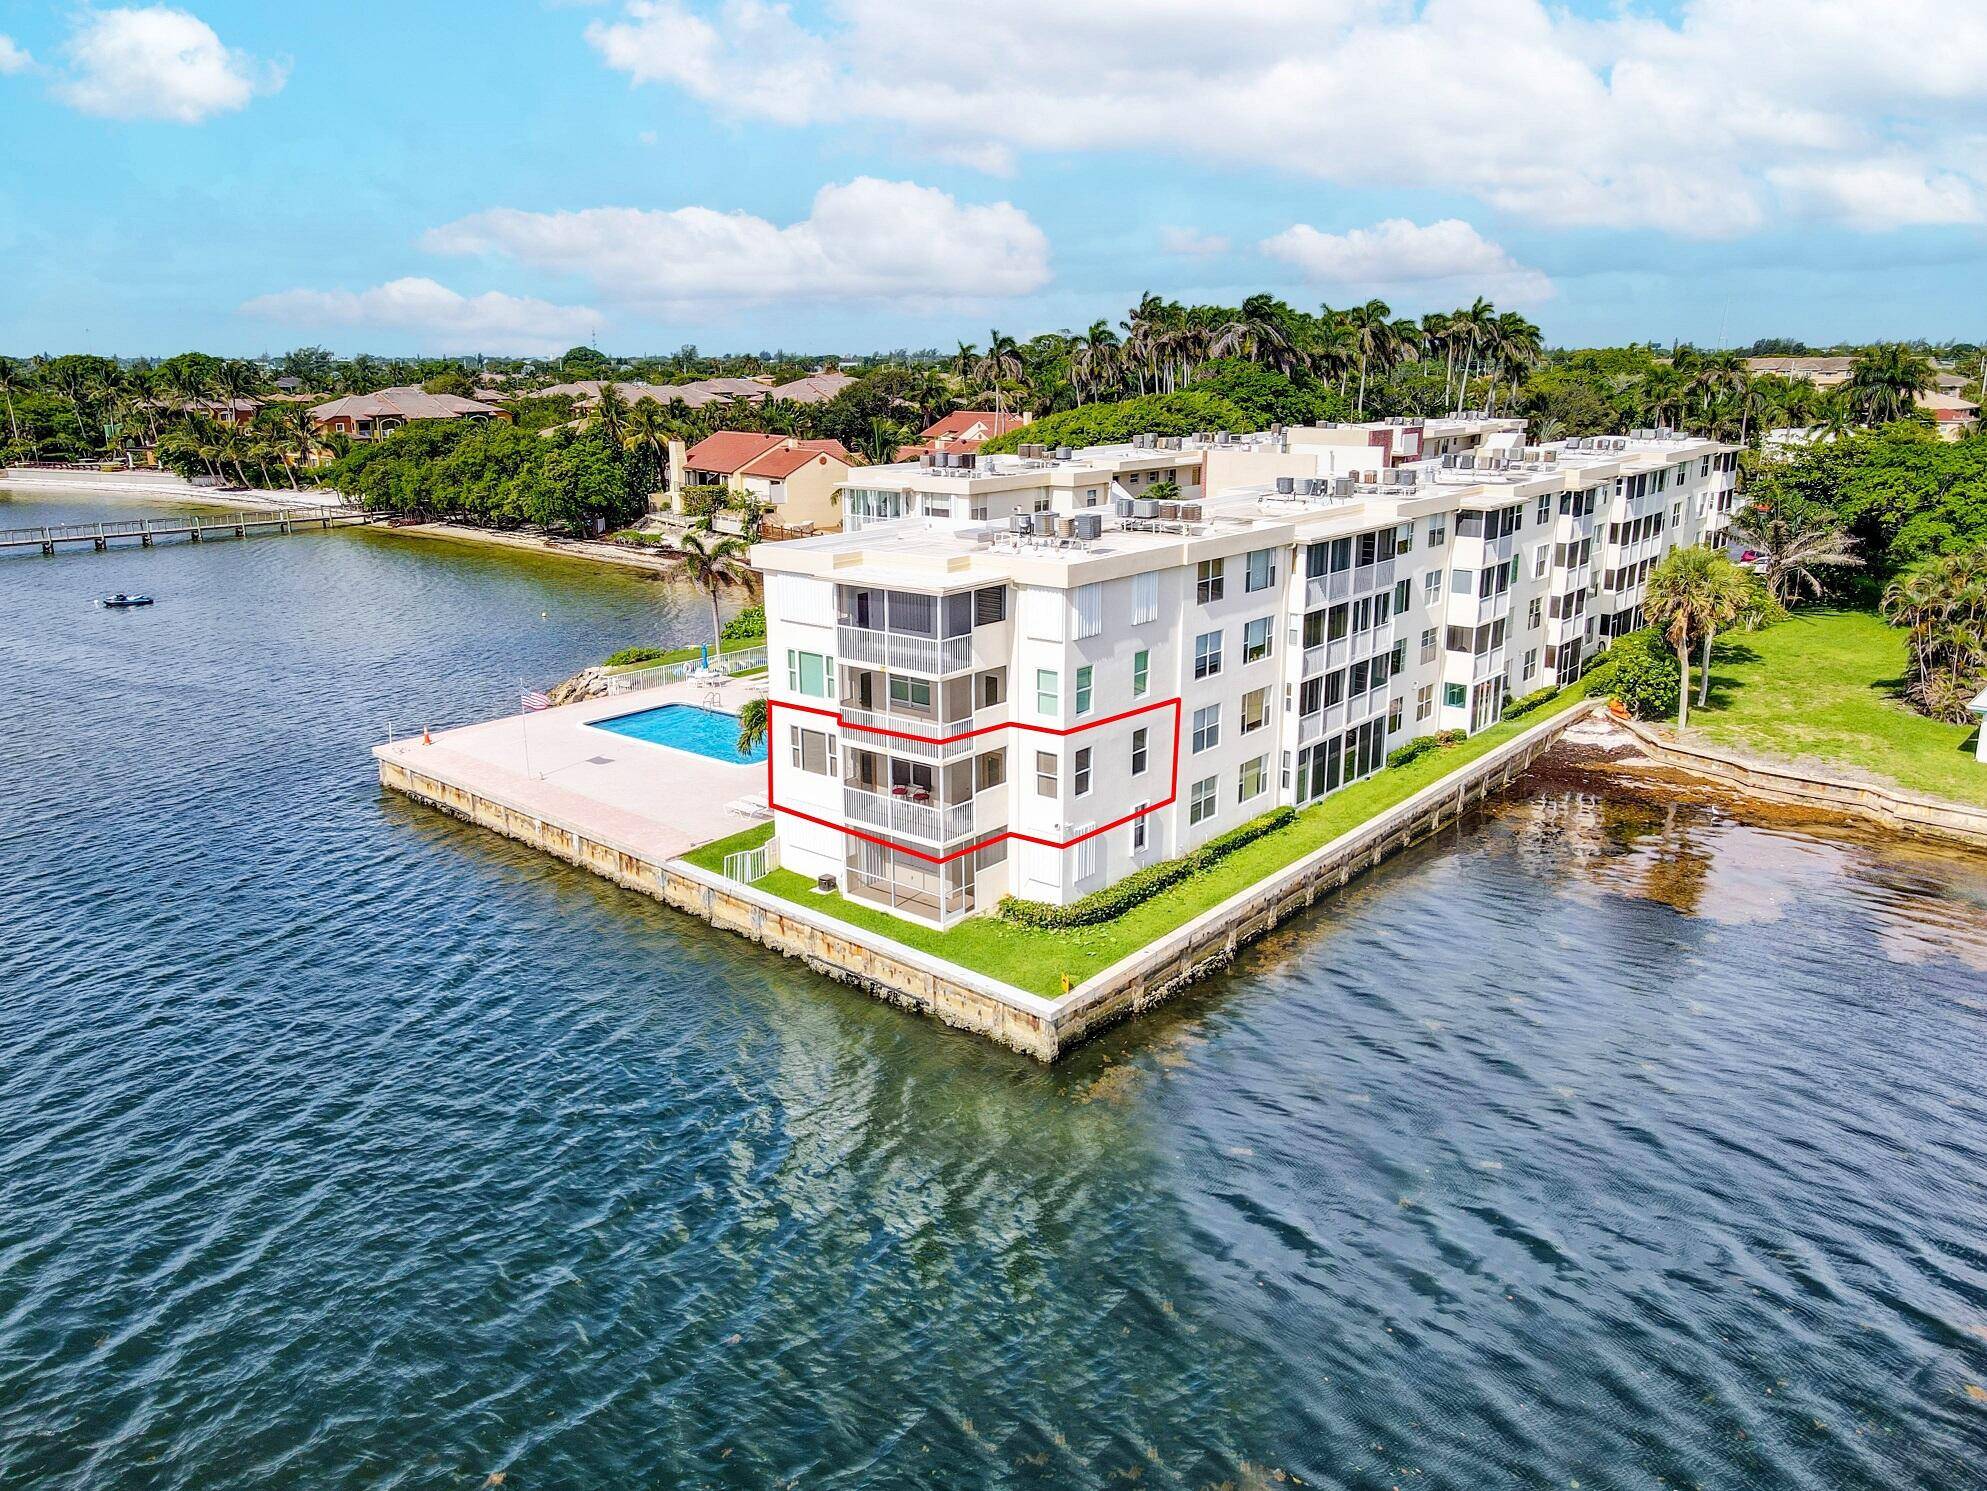 Amazing Intracoastal Waterway Views from every room !